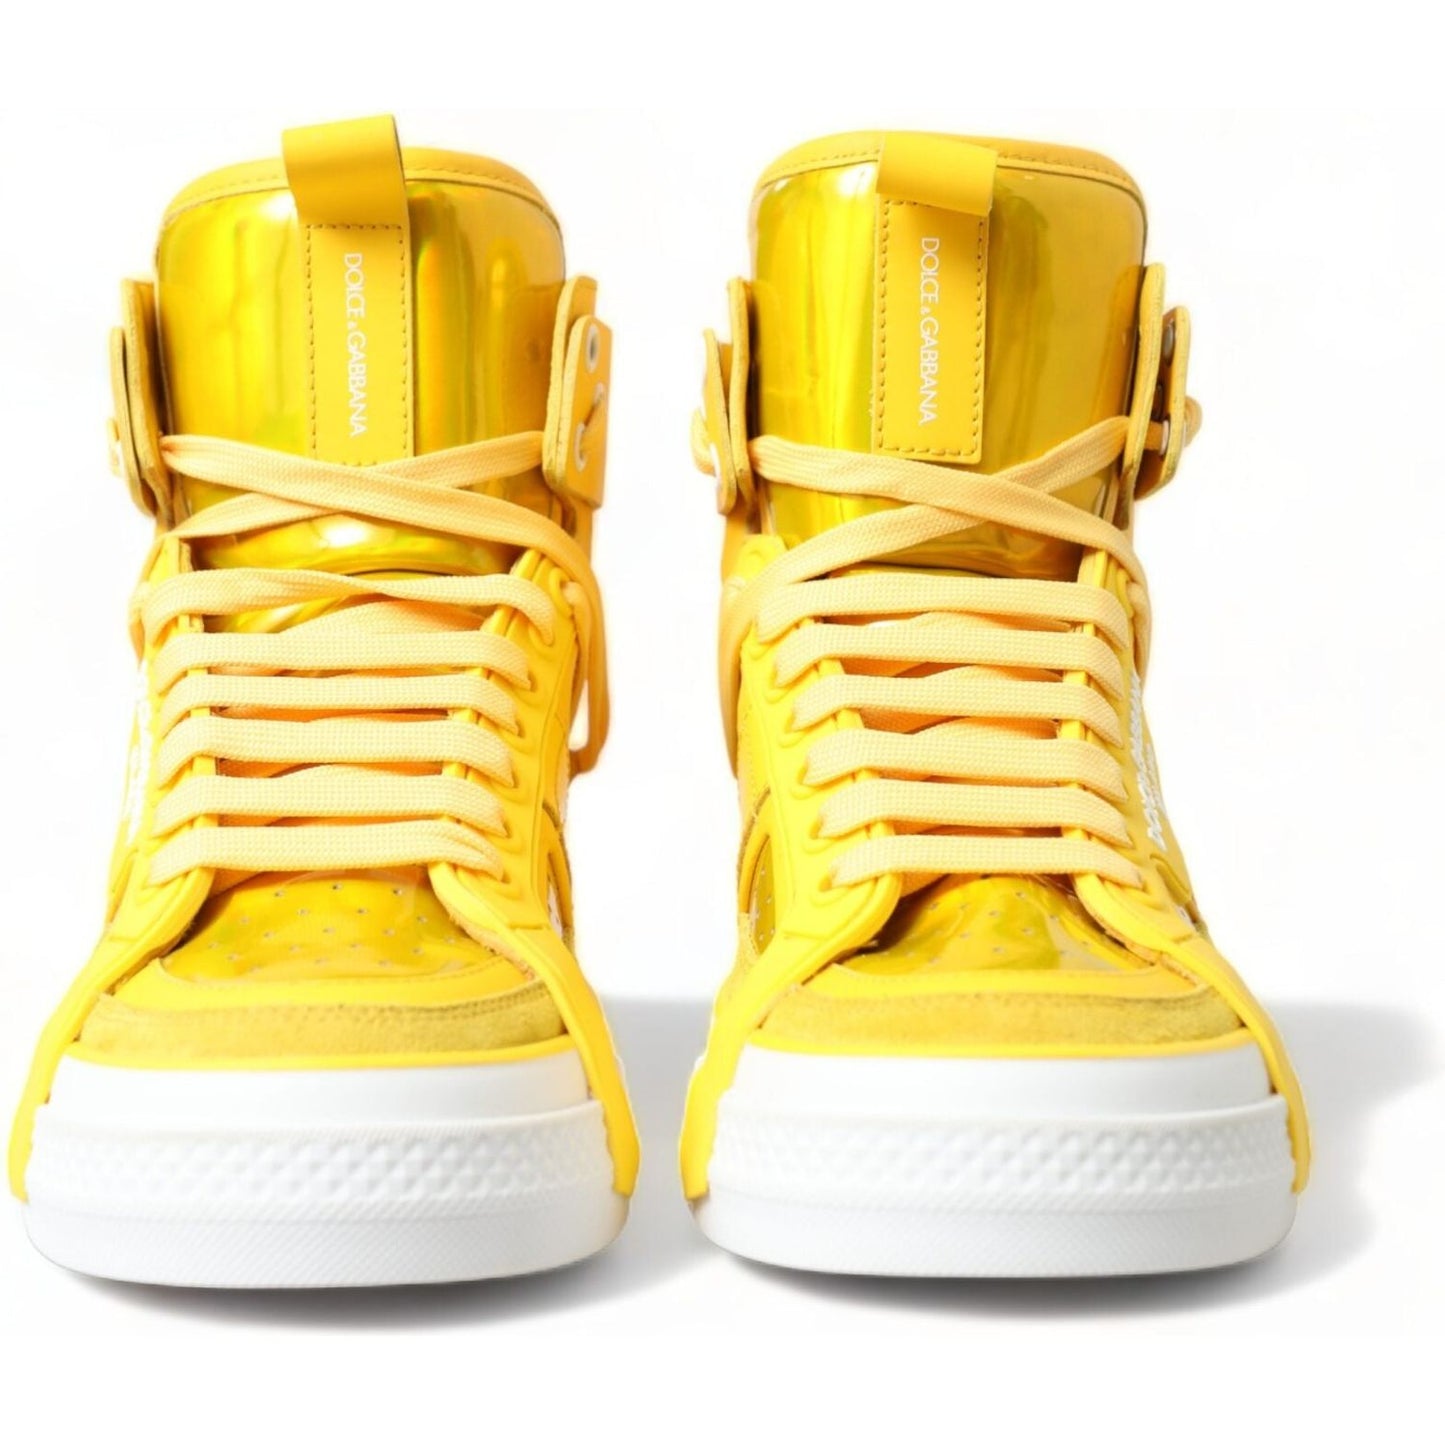 Dolce & Gabbana Chic High-Top Color-Block Sneakers yellow-white-leather-high-top-sneakers-shoes